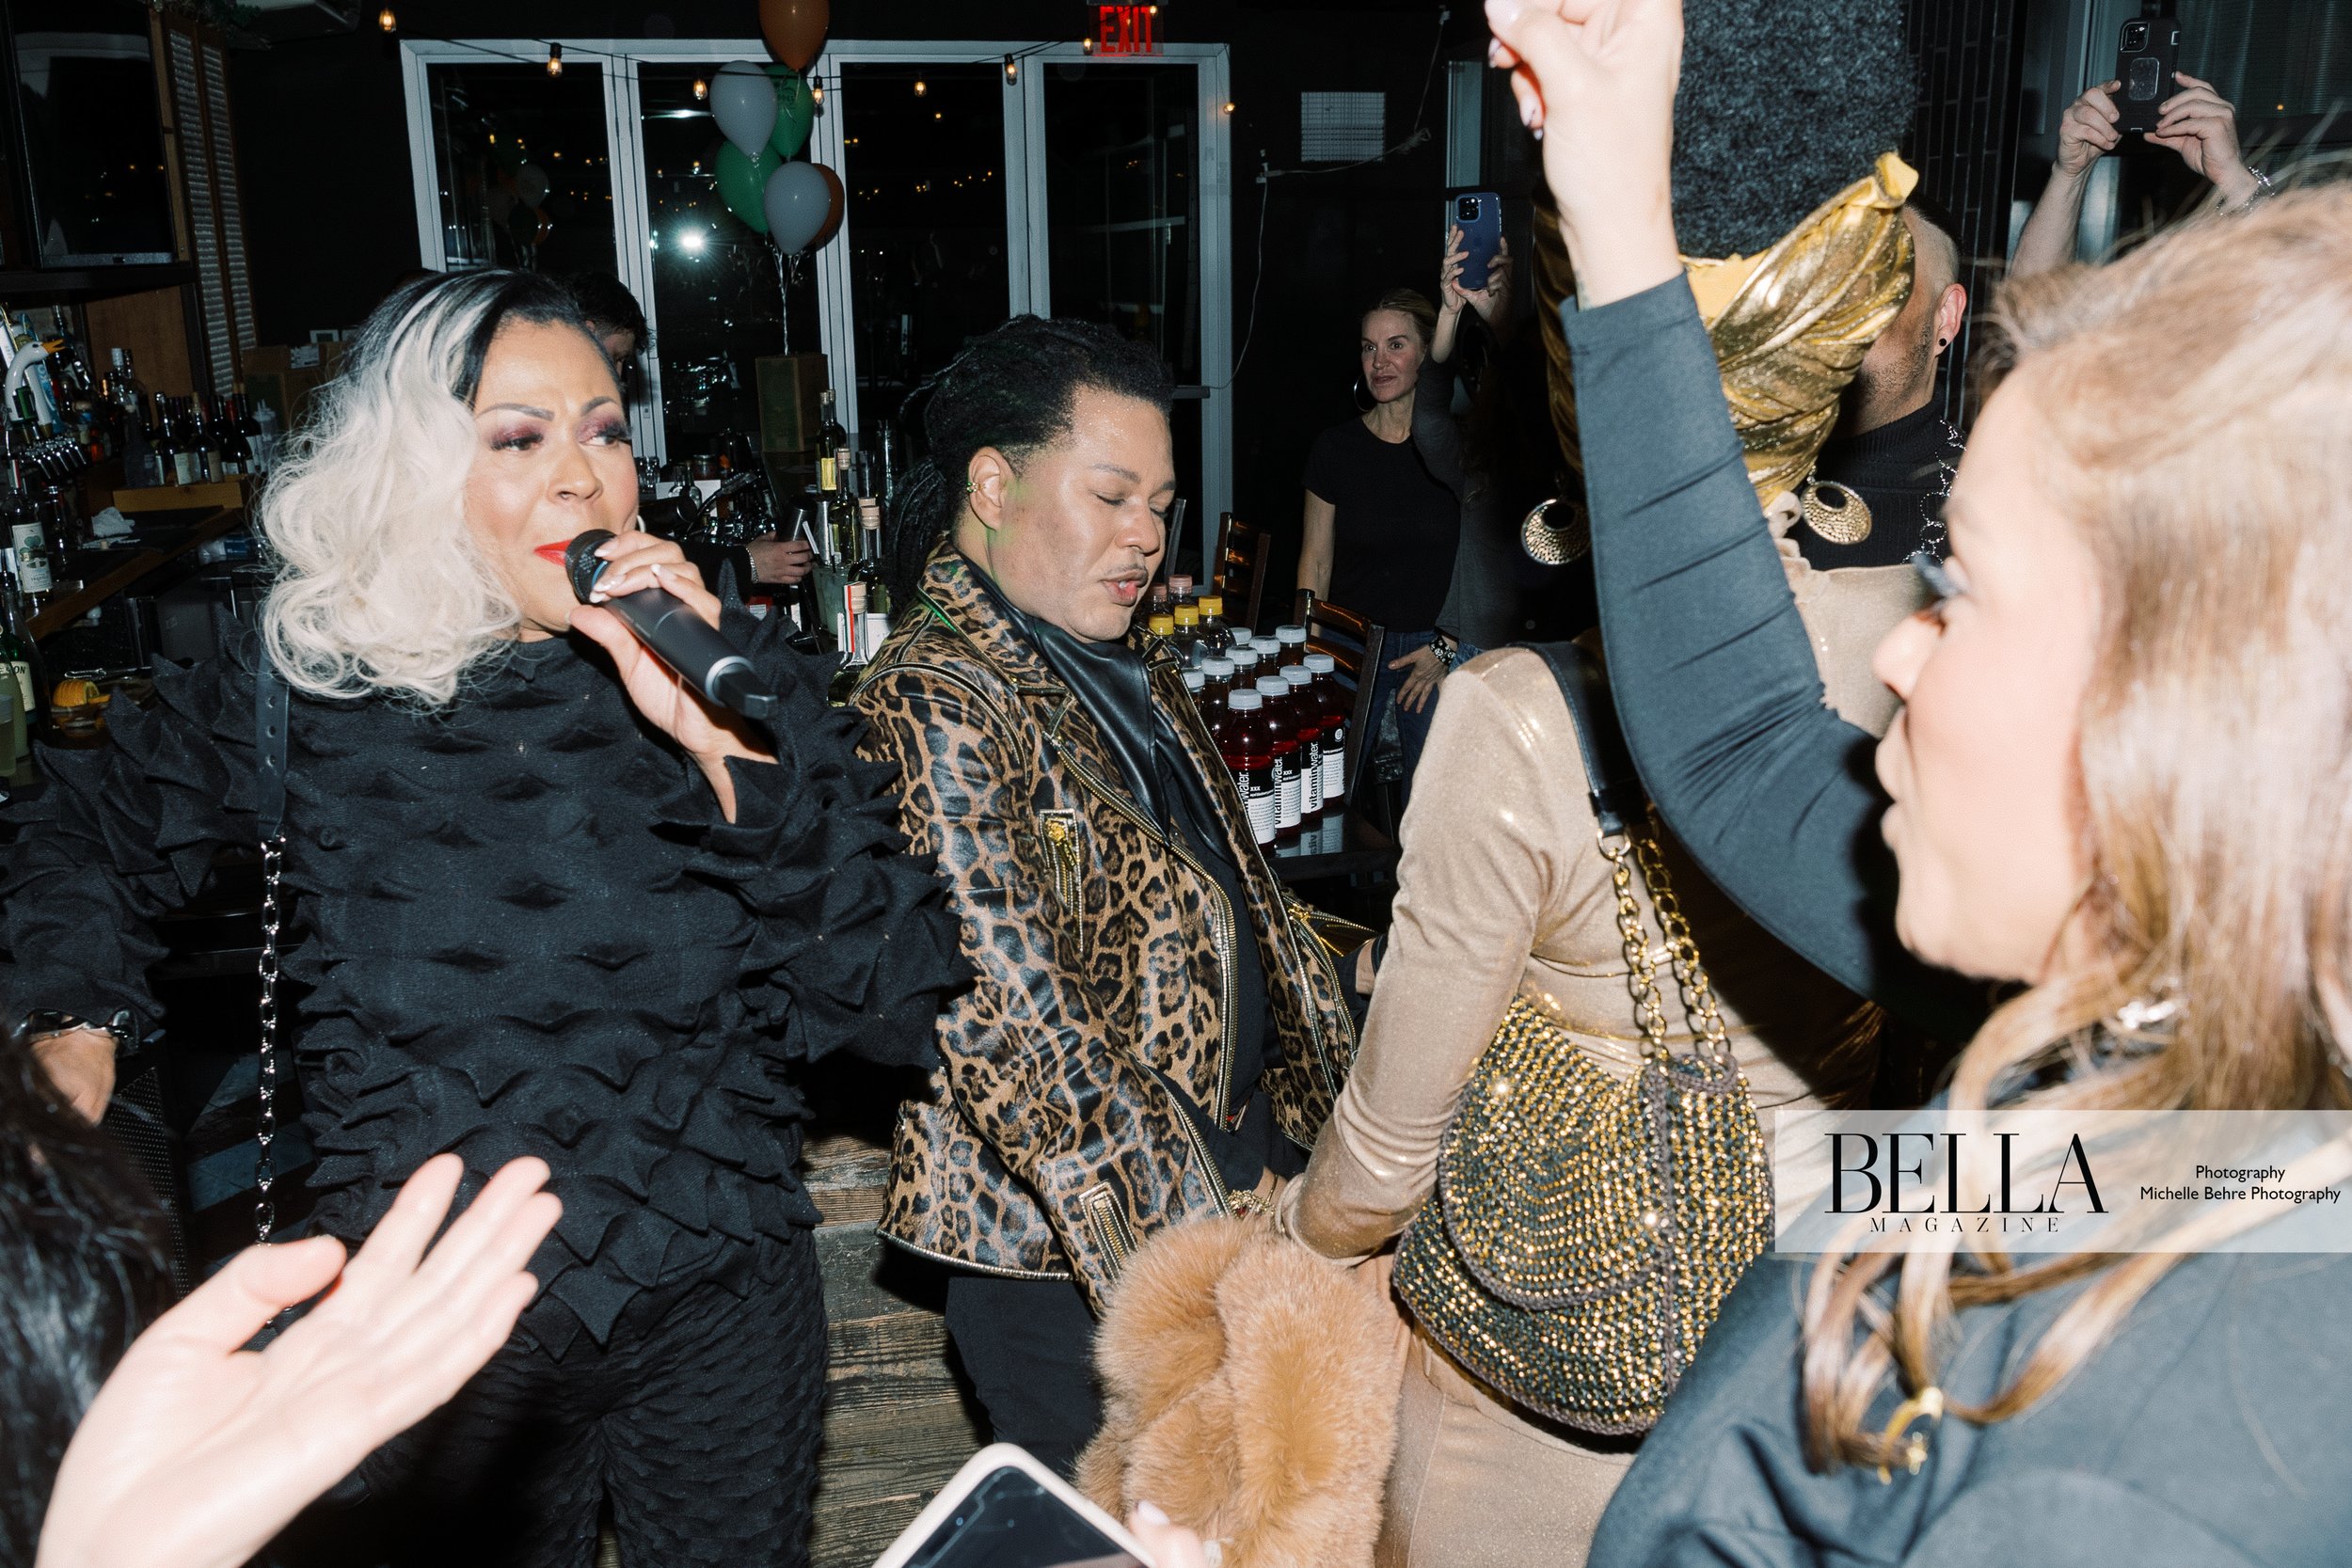 COVERPARTY2Michelle-Behre-Creative-Co-BELLA-Magazine-Women-of-Influence-Cover-Party-Burgerology-244.jpg